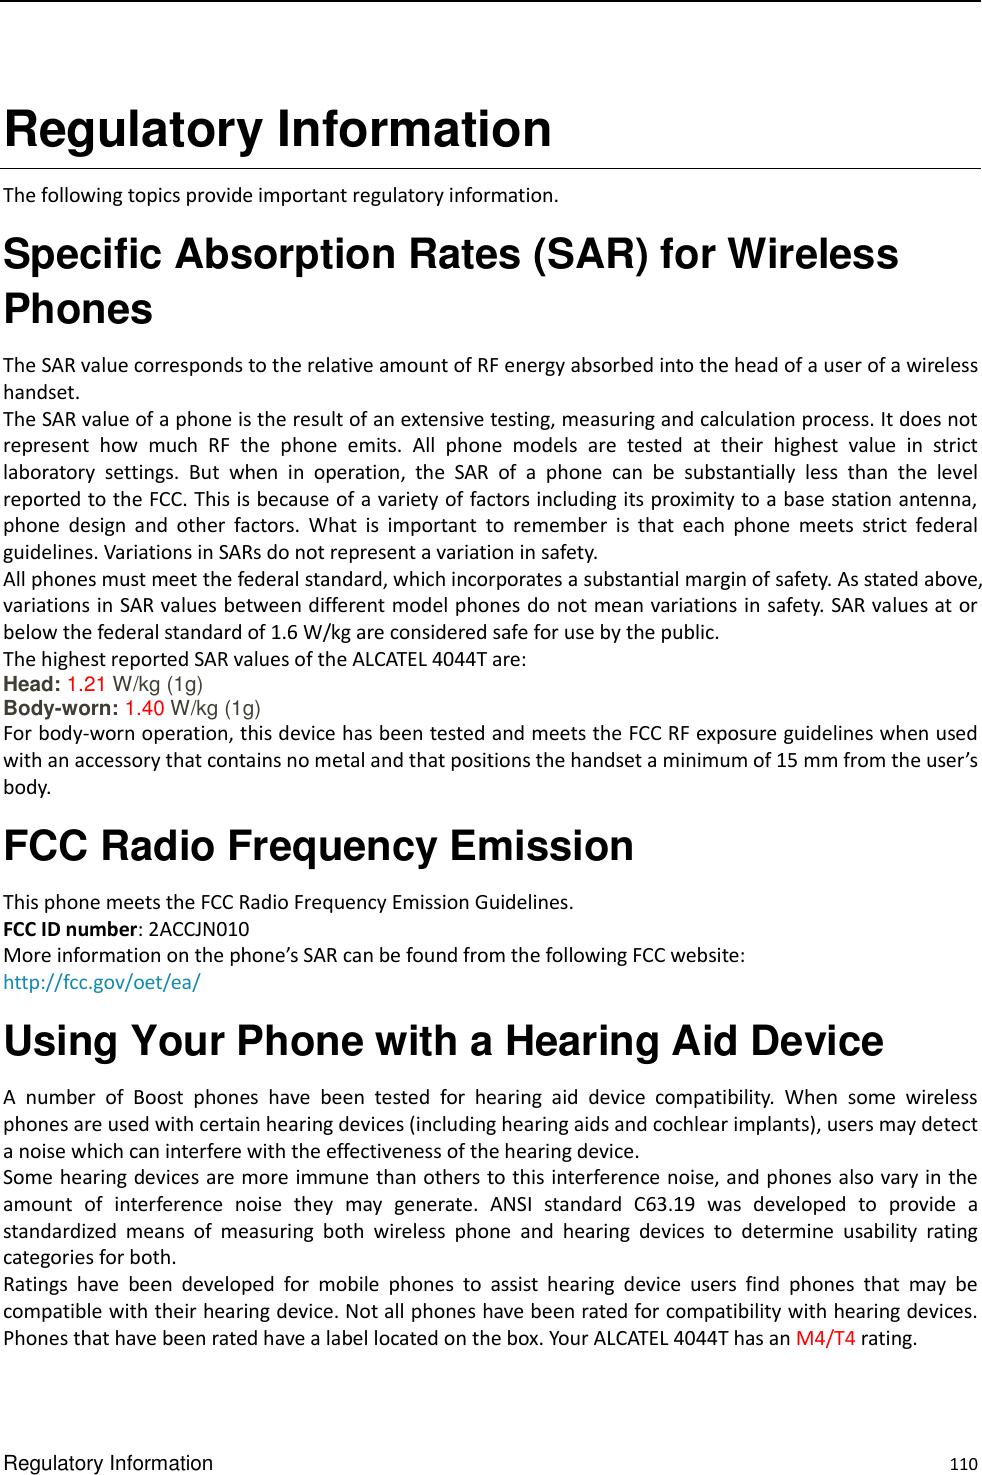  Regulatory Information    110 Regulatory Information   The following topics provide important regulatory information.   Specific Absorption Rates (SAR) for Wireless Phones   The SAR value corresponds to the relative amount of RF energy absorbed into the head of a user of a wireless handset. The SAR value of a phone is the result of an extensive testing, measuring and calculation process. It does not represent  how  much  RF  the  phone  emits.  All  phone  models  are  tested  at  their  highest  value  in  strict laboratory  settings.  But  when  in  operation,  the  SAR  of  a  phone  can  be  substantially  less  than  the  level reported to the FCC. This is because of a variety of factors including its proximity to a base station antenna, phone  design  and  other  factors.  What  is  important  to  remember  is  that  each  phone  meets  strict  federal guidelines. Variations in SARs do not represent a variation in safety. All phones must meet the federal standard, which incorporates a substantial margin of safety. As stated above, variations in SAR values between different model phones do not mean variations in safety. SAR values at or below the federal standard of 1.6 W/kg are considered safe for use by the public. The highest reported SAR values of the ALCATEL 4044T are: Head: 1.21 W/kg (1g)   Body-worn: 1.40 W/kg (1g)   For body-worn operation, this device has been tested and meets the FCC RF exposure guidelines when used with an accessory that contains no metal and that positions the handset a minimum of 15 mm from the user’s body. FCC Radio Frequency Emission This phone meets the FCC Radio Frequency Emission Guidelines.   FCC ID number: 2ACCJN010 More information on the phone’s SAR can be found from the following FCC website:   http://fcc.gov/oet/ea/ Using Your Phone with a Hearing Aid Device A  number  of  Boost  phones  have  been  tested  for  hearing  aid  device  compatibility.  When  some  wireless phones are used with certain hearing devices (including hearing aids and cochlear implants), users may detect a noise which can interfere with the effectiveness of the hearing device.   Some hearing devices are more immune than others to this interference noise, and phones also vary in the amount  of  interference  noise  they  may  generate.  ANSI  standard  C63.19  was  developed  to  provide  a standardized  means  of  measuring  both  wireless  phone  and  hearing  devices  to  determine  usability  rating categories for both.   Ratings  have  been  developed  for  mobile  phones  to  assist  hearing  device  users  find  phones  that  may  be compatible with their hearing device. Not all phones have been rated for compatibility with hearing devices. Phones that have been rated have a label located on the box. Your ALCATEL 4044T has an M4/T4 rating.   